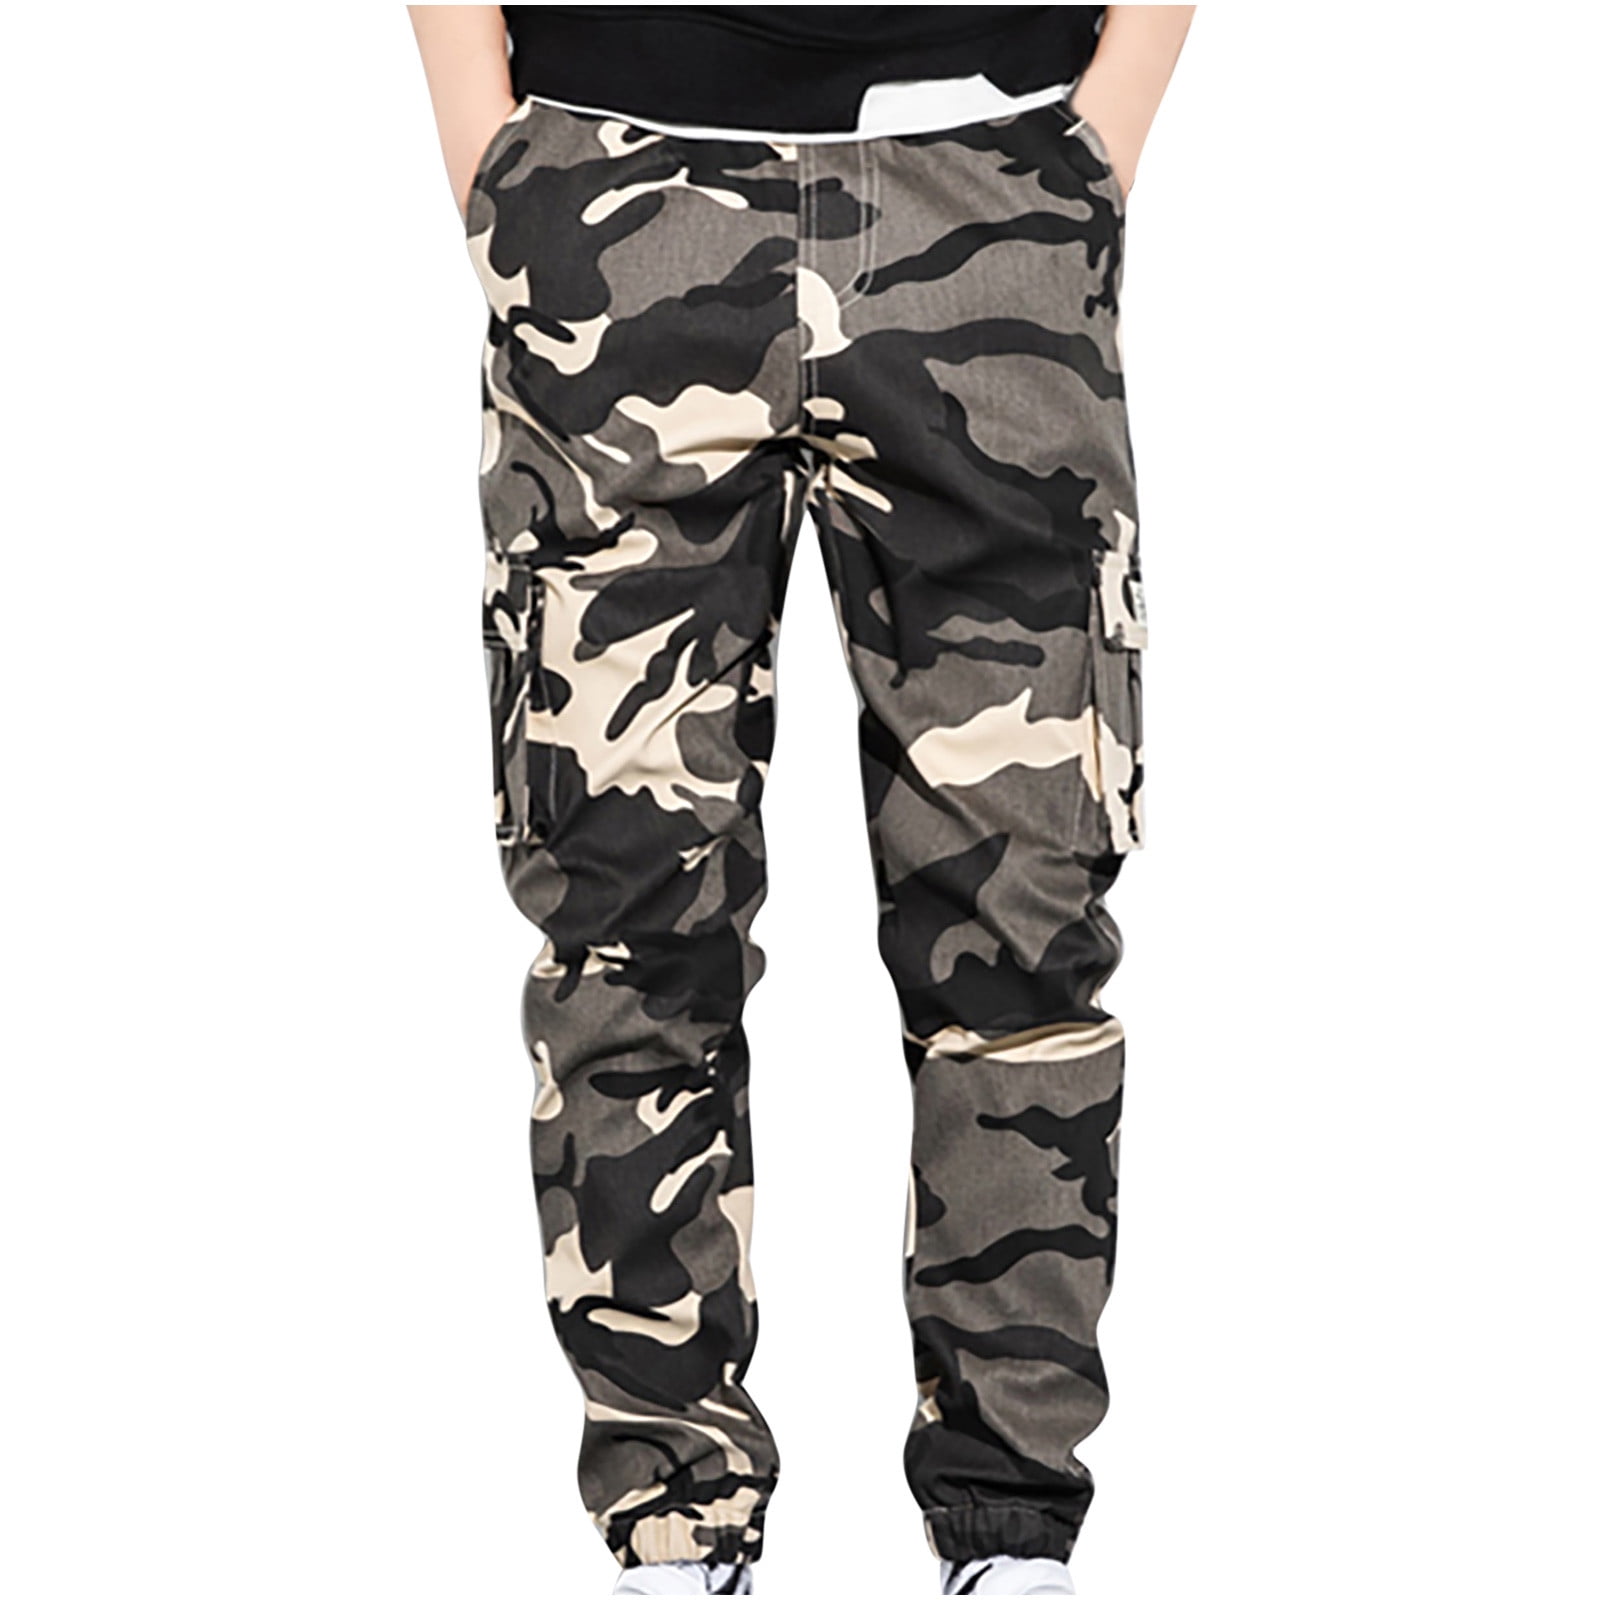 Buy ZLSLZ Mens Military Tactical Casual Camouflage MultiPocket BDU Cargo  Pants Trousers 660green 32 at Amazonin